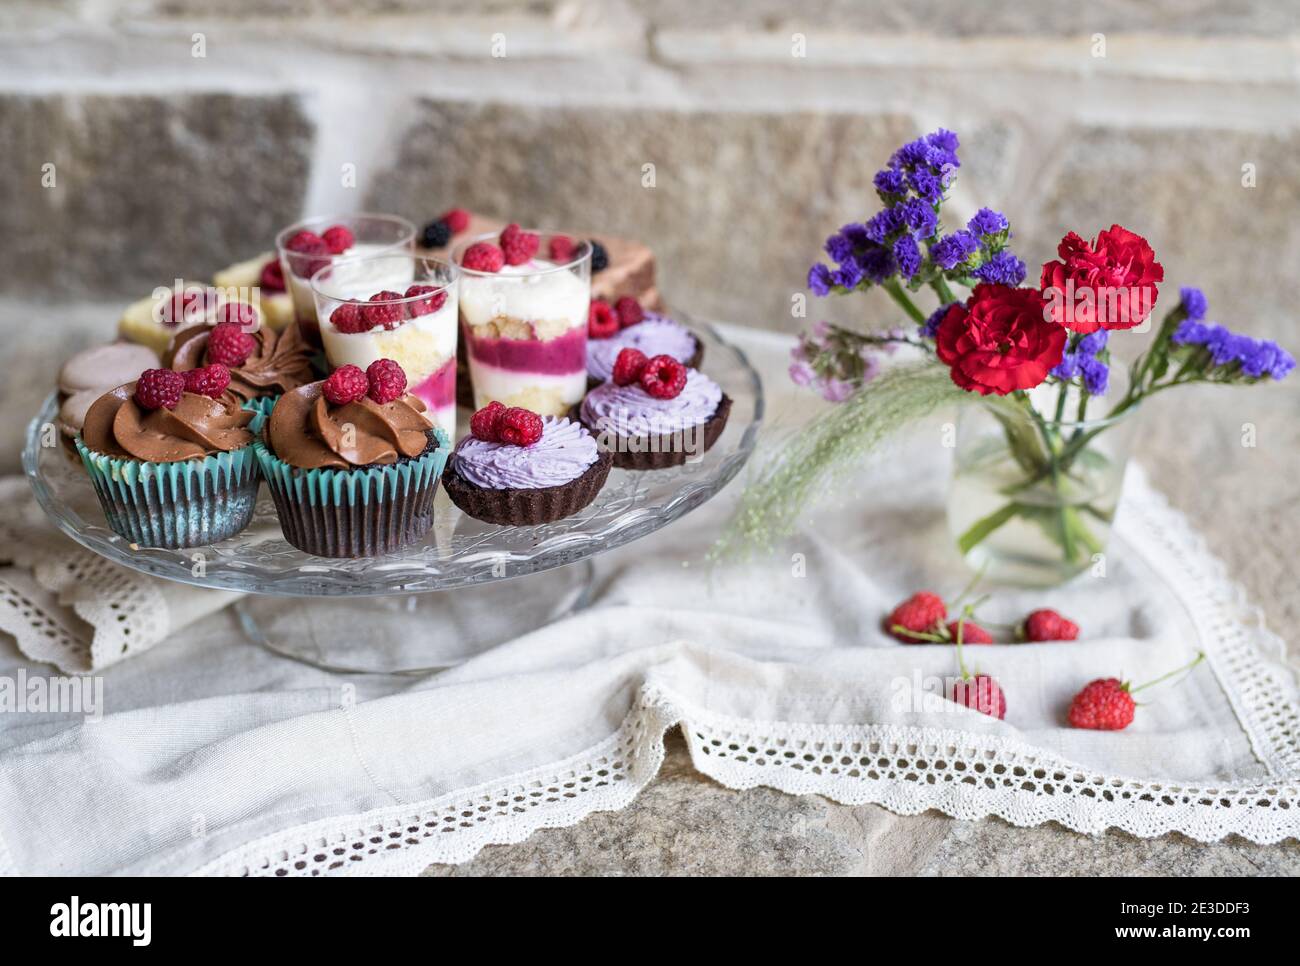 Selection of colorful and delicious cake desserts on tray on table. Stock Photo